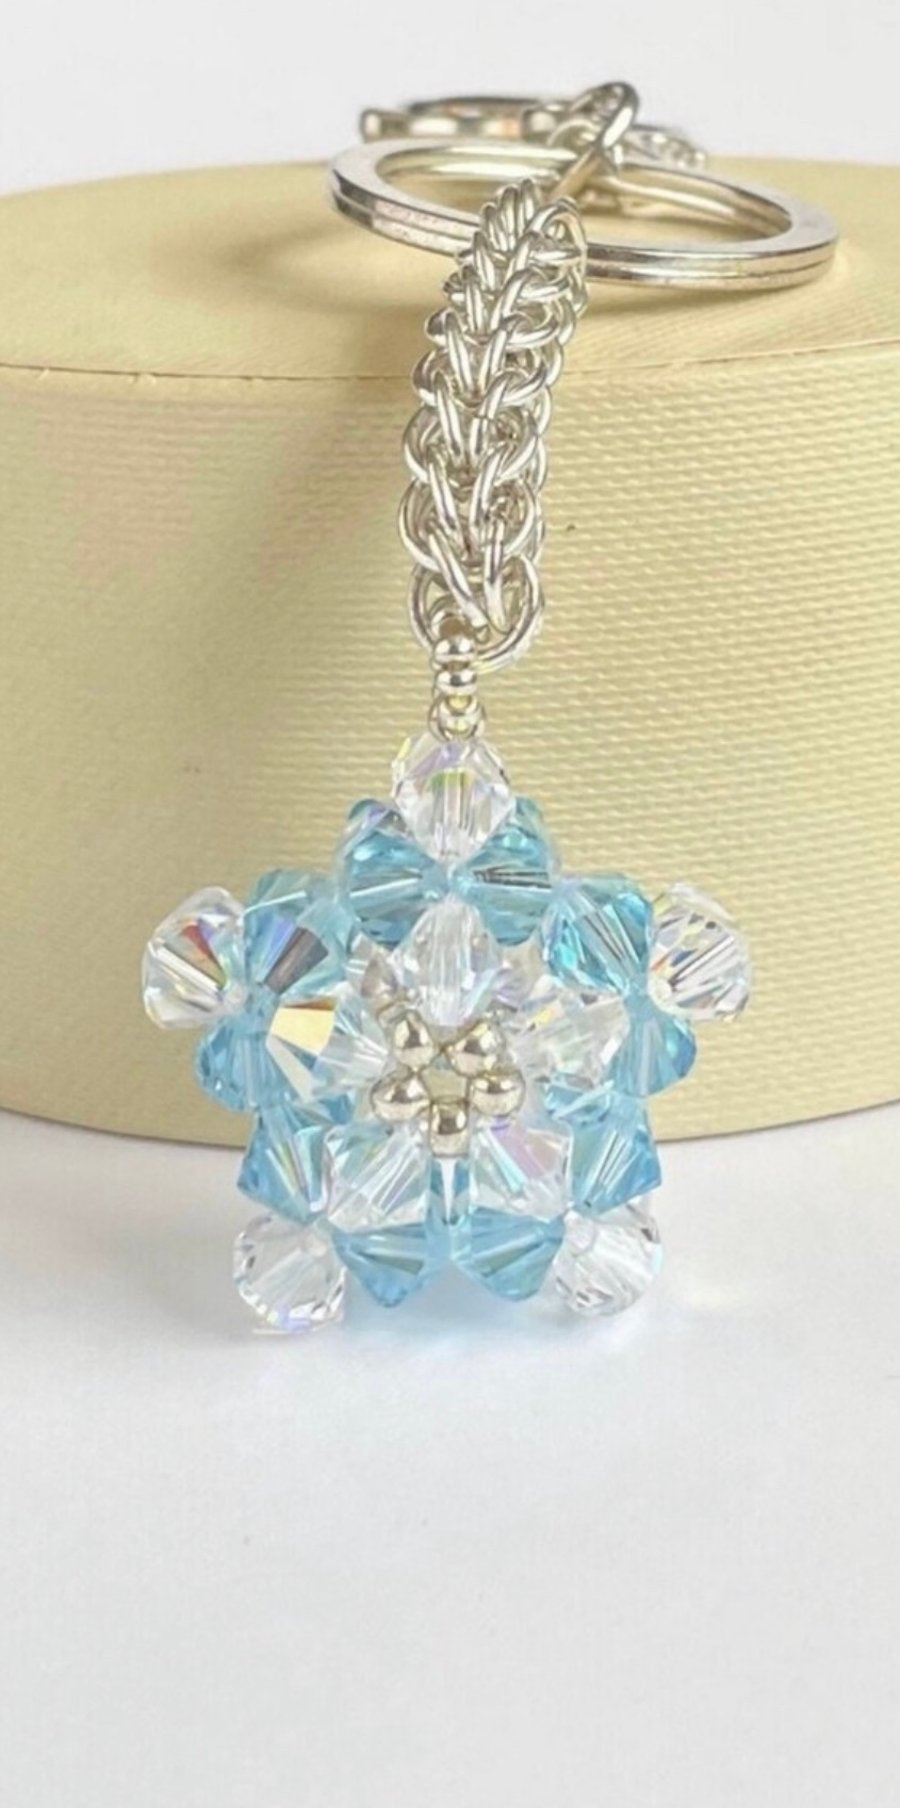 Handbag Charm, Aquamarine Crystal Star, with a Chainmaille Chain and Keyring